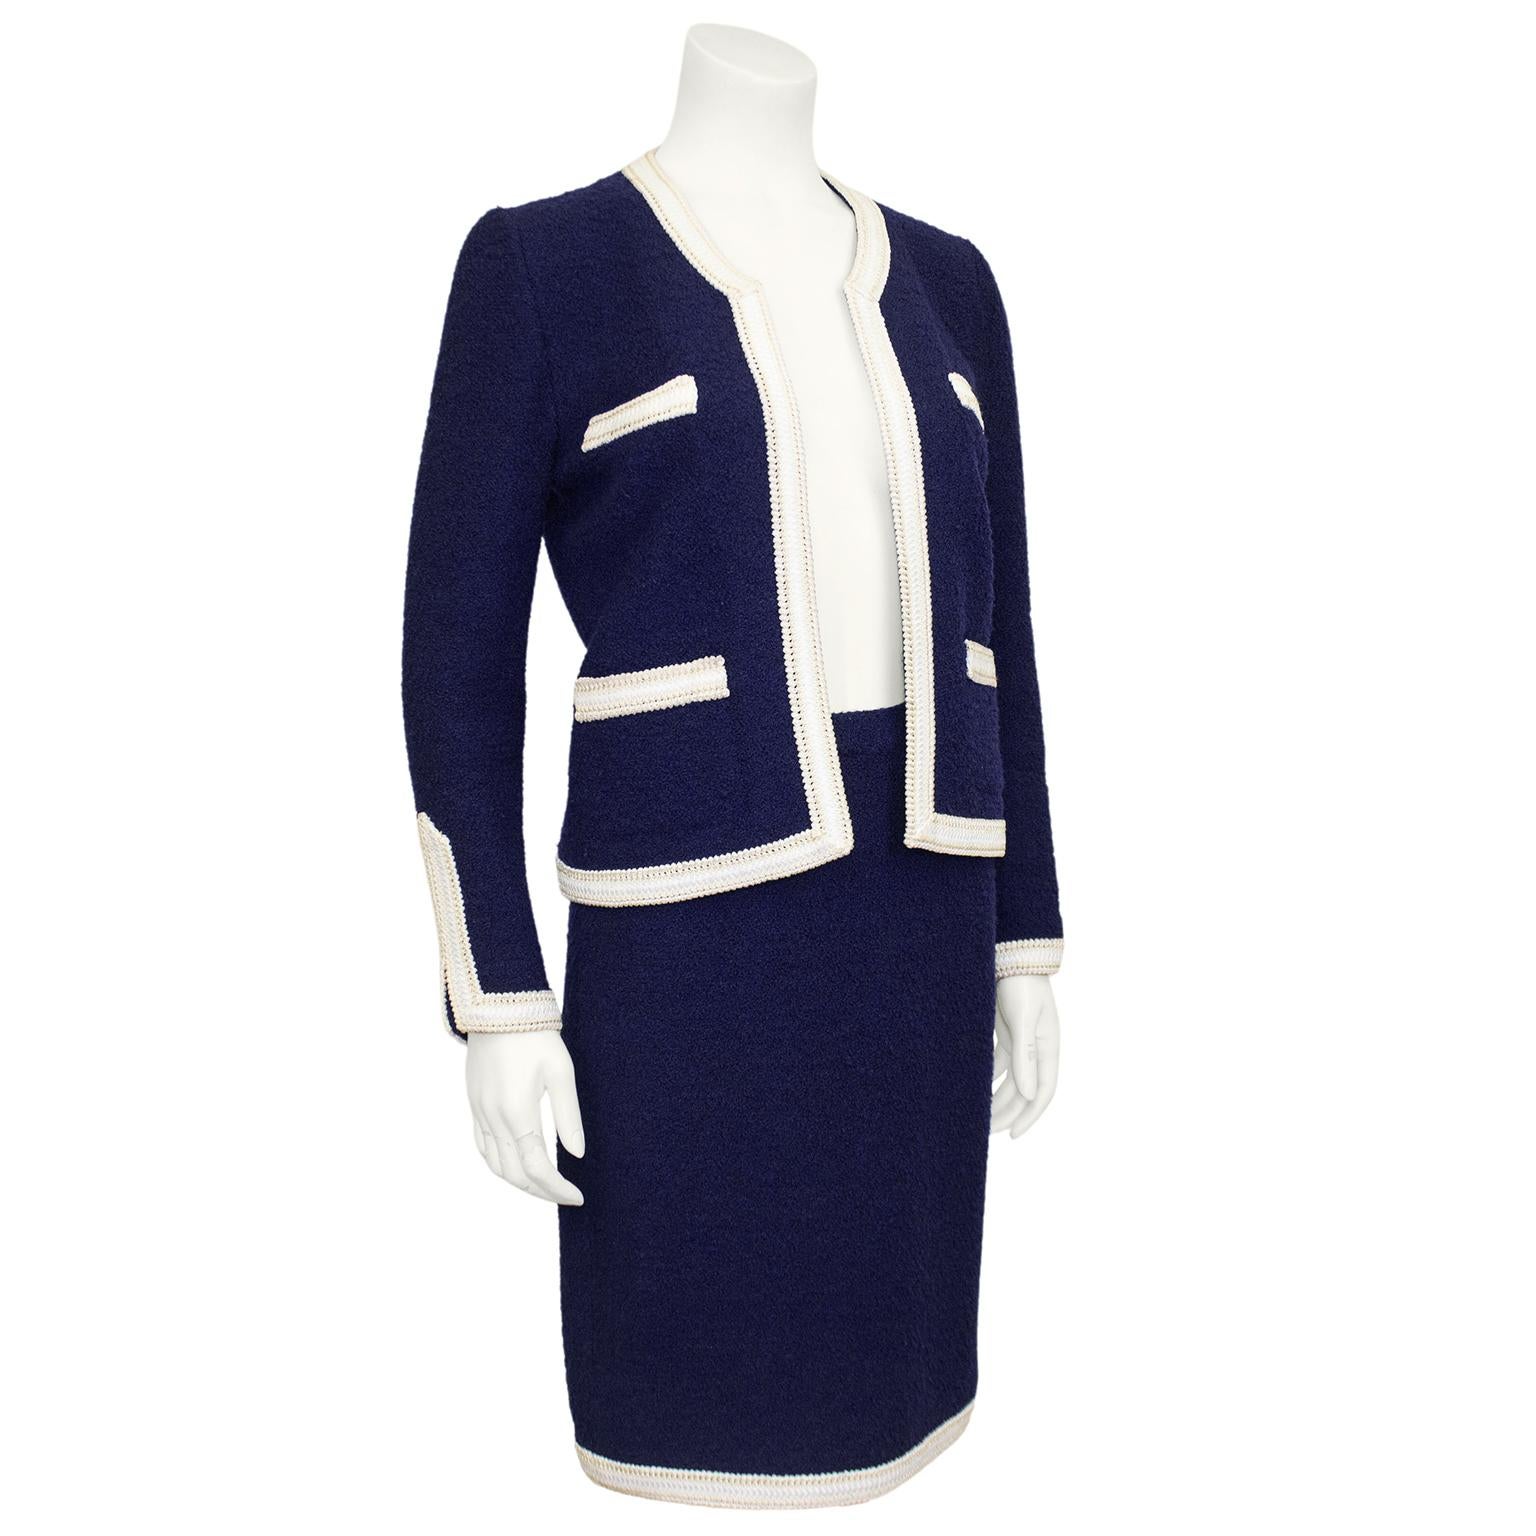 Lovely Adolfo wool knit skirt suit from the 1980s. Navy blue with 1